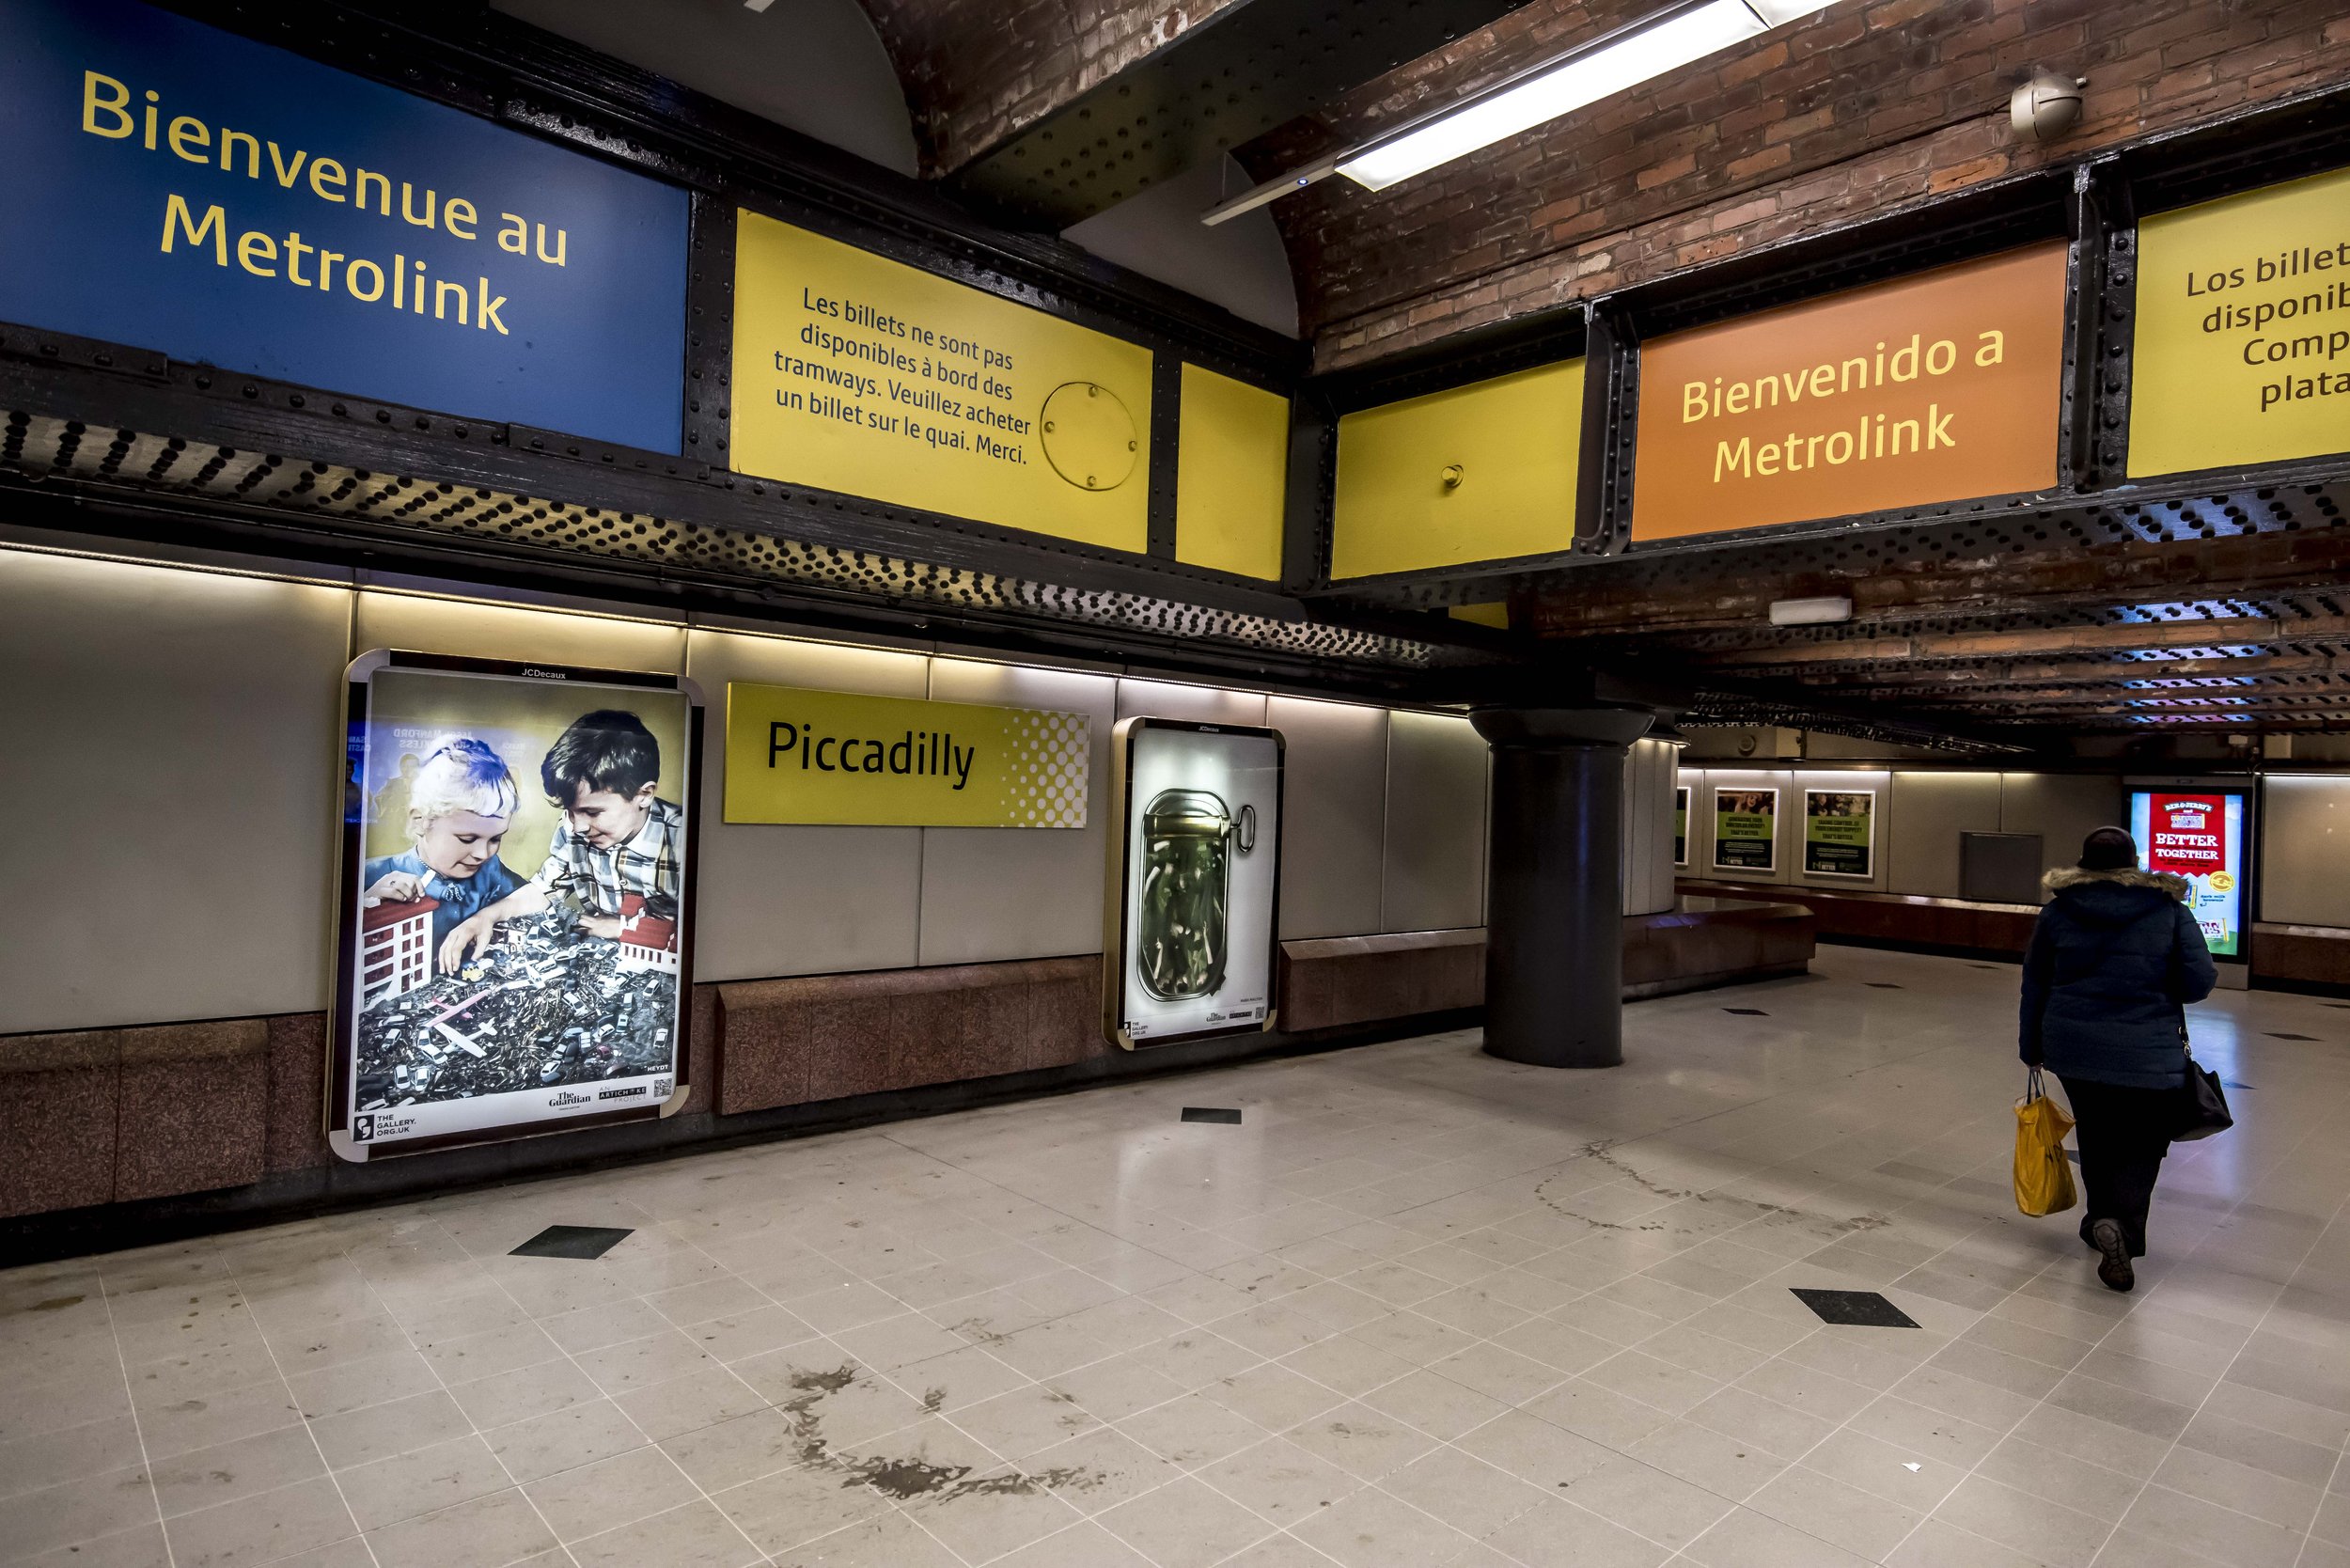 ‘Last to inherit’ (2020) by HEYDT and ‘Forced into a ‘TickBox’(2023) by Hugh Malyon. The Gallery, Season 2, 2023. Produced by Artichoke. Photo by Chris Payne. Piccadilly Metro, Manchester. Landscape 6.jpg